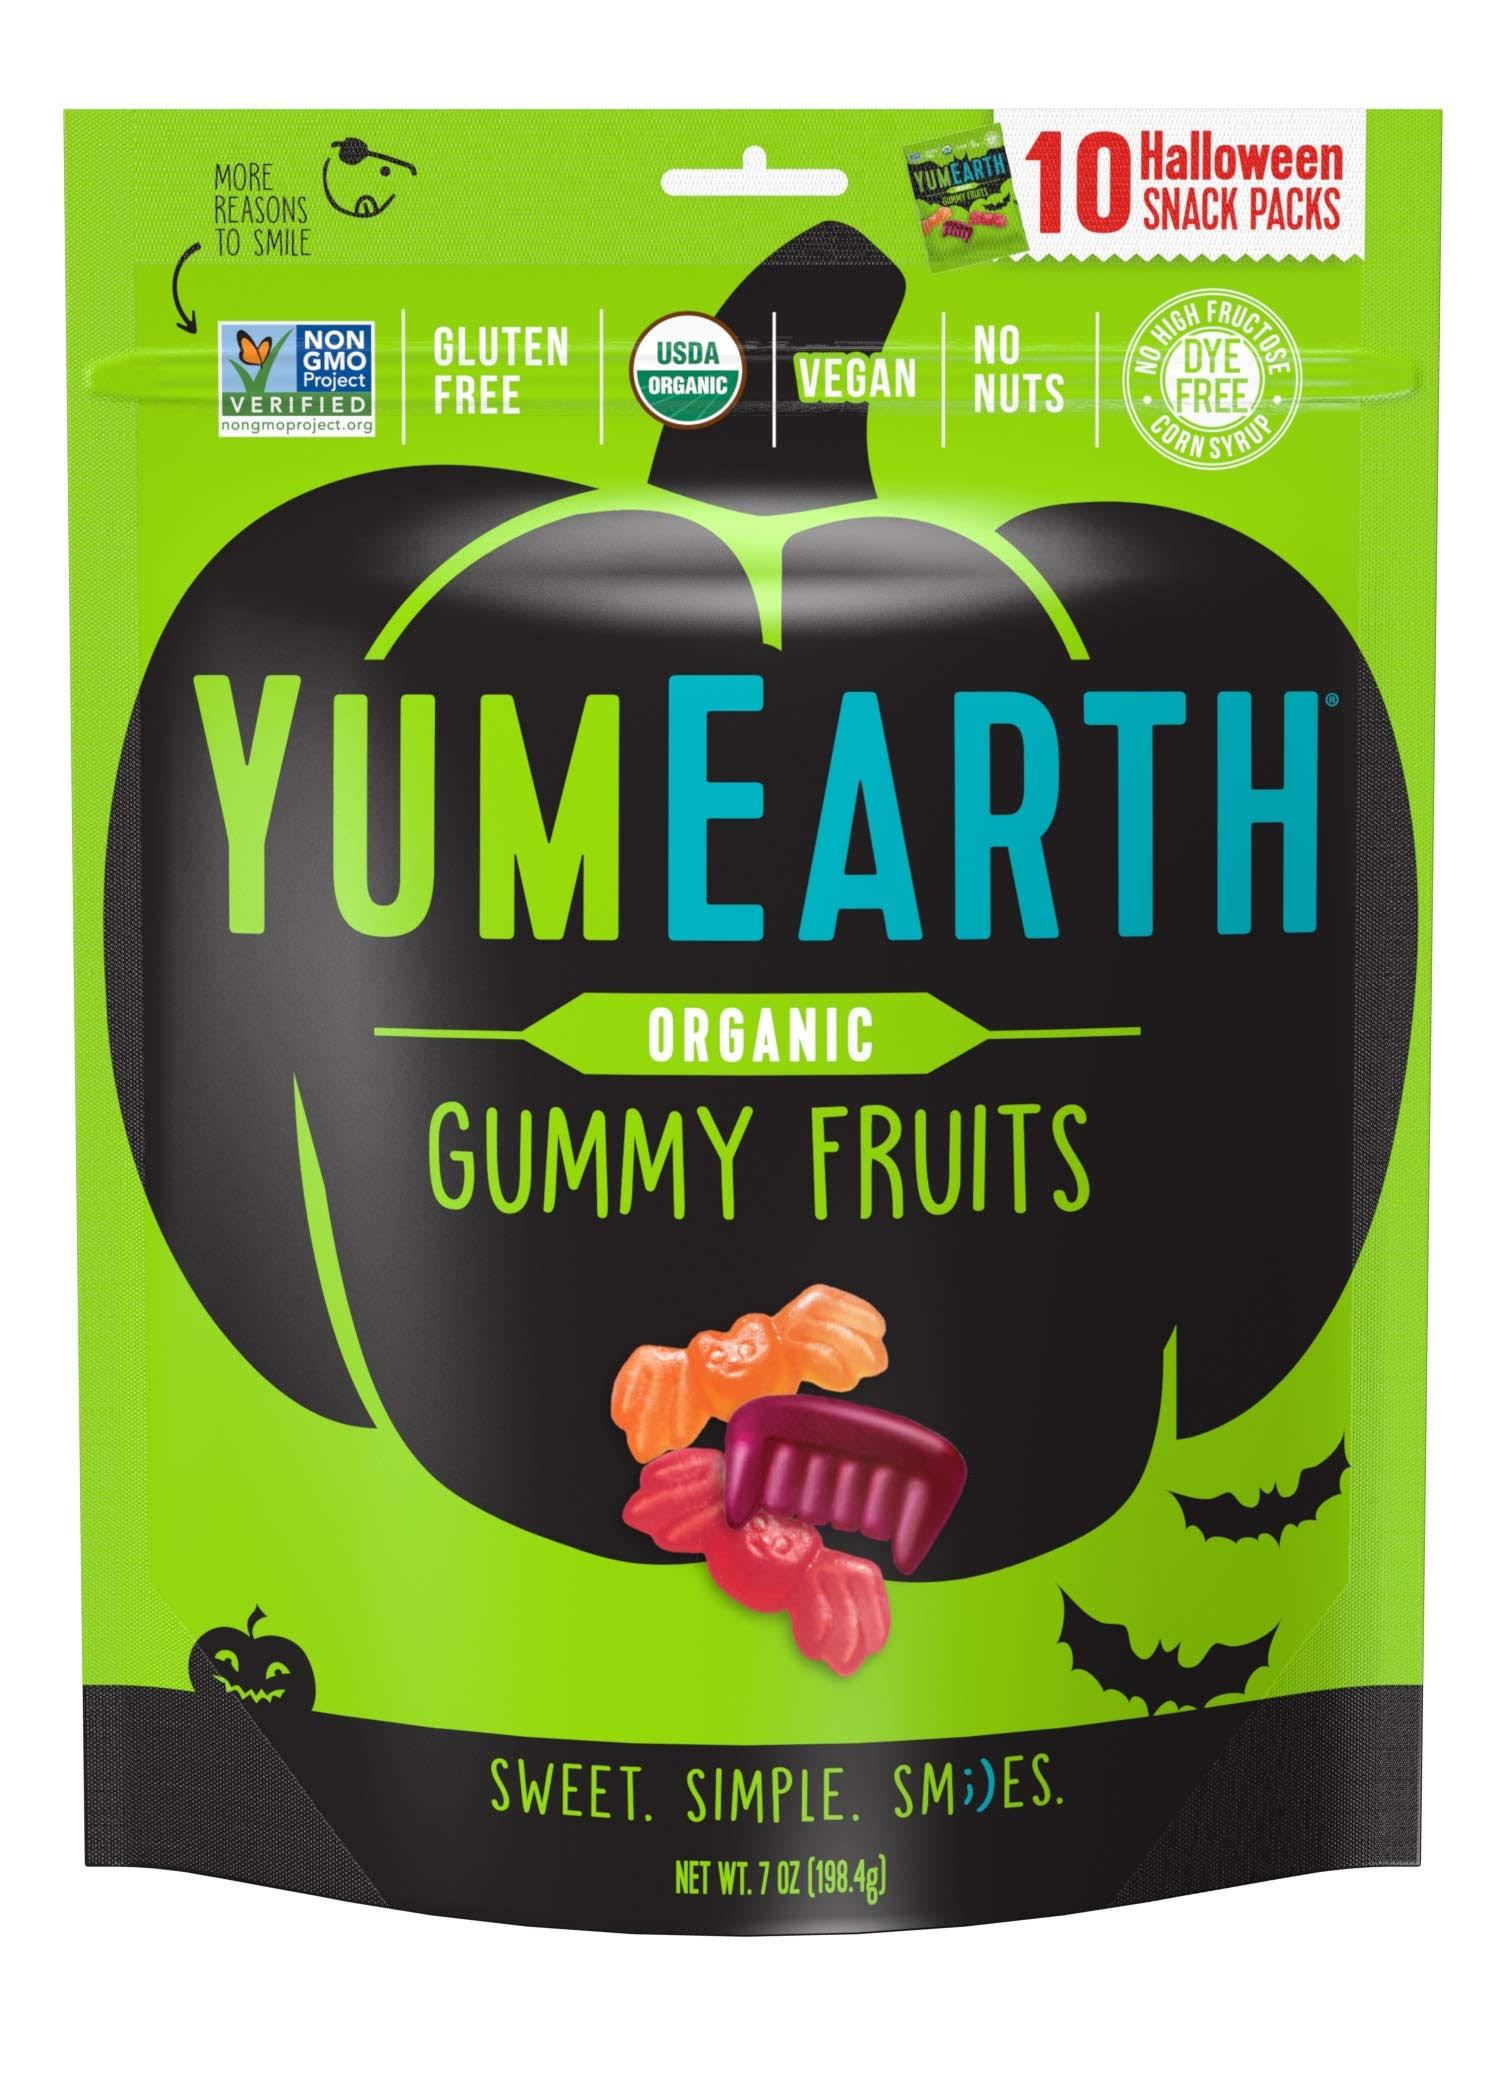 YumEarth - Organic Halloween Gummy Fruits Variety Pack - 10 Pack(s)